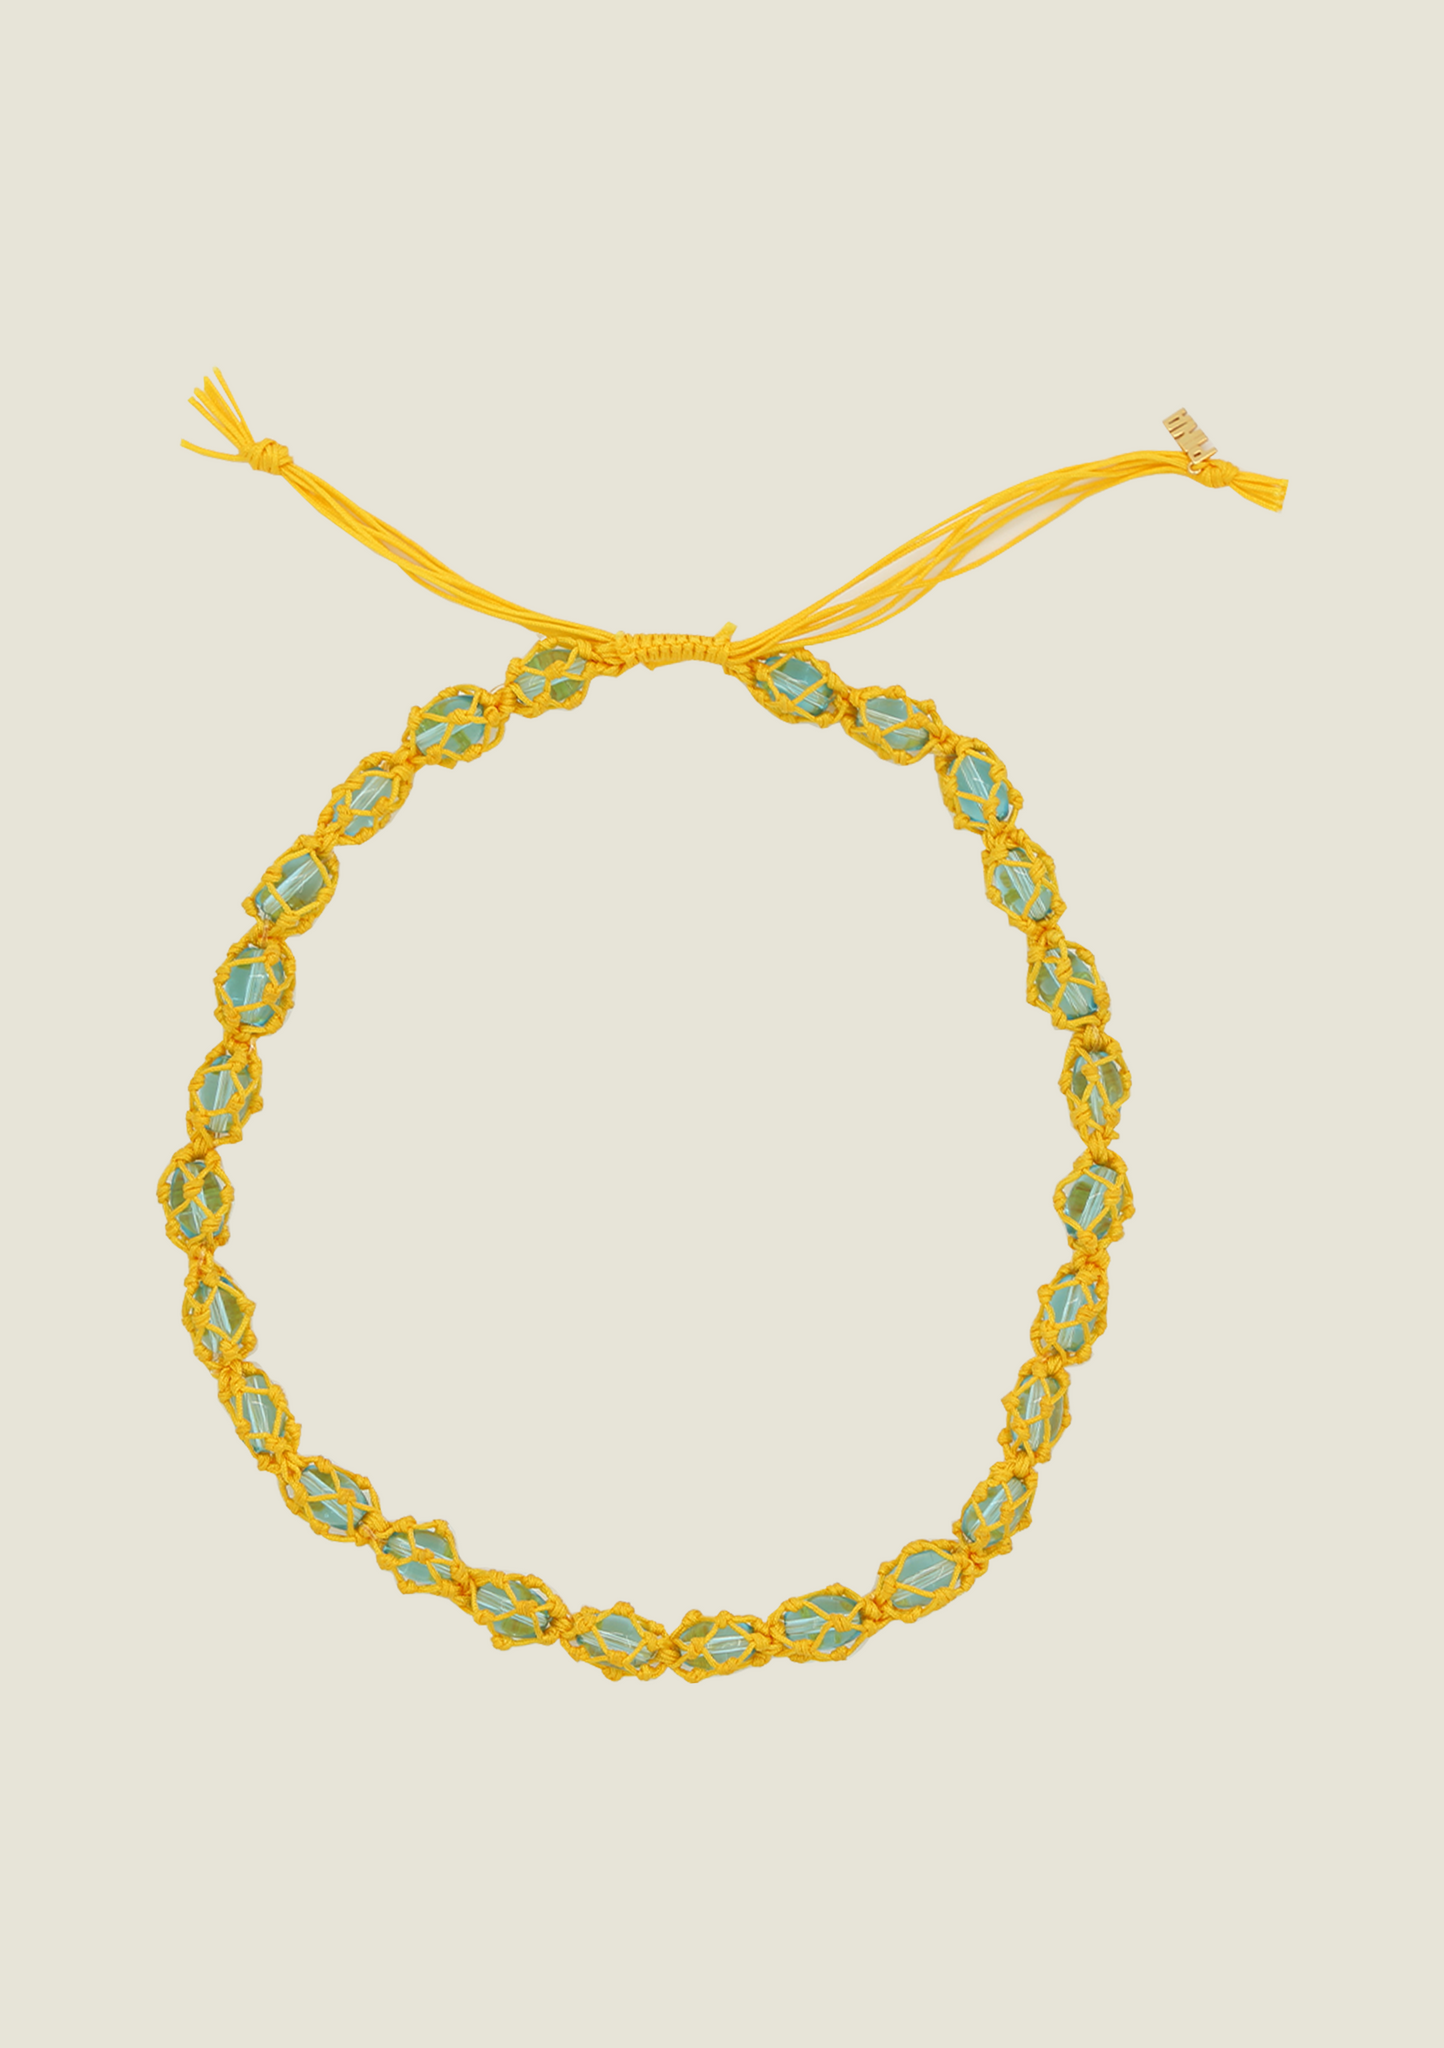 Melon Necklace - Yellow & Blue Bead